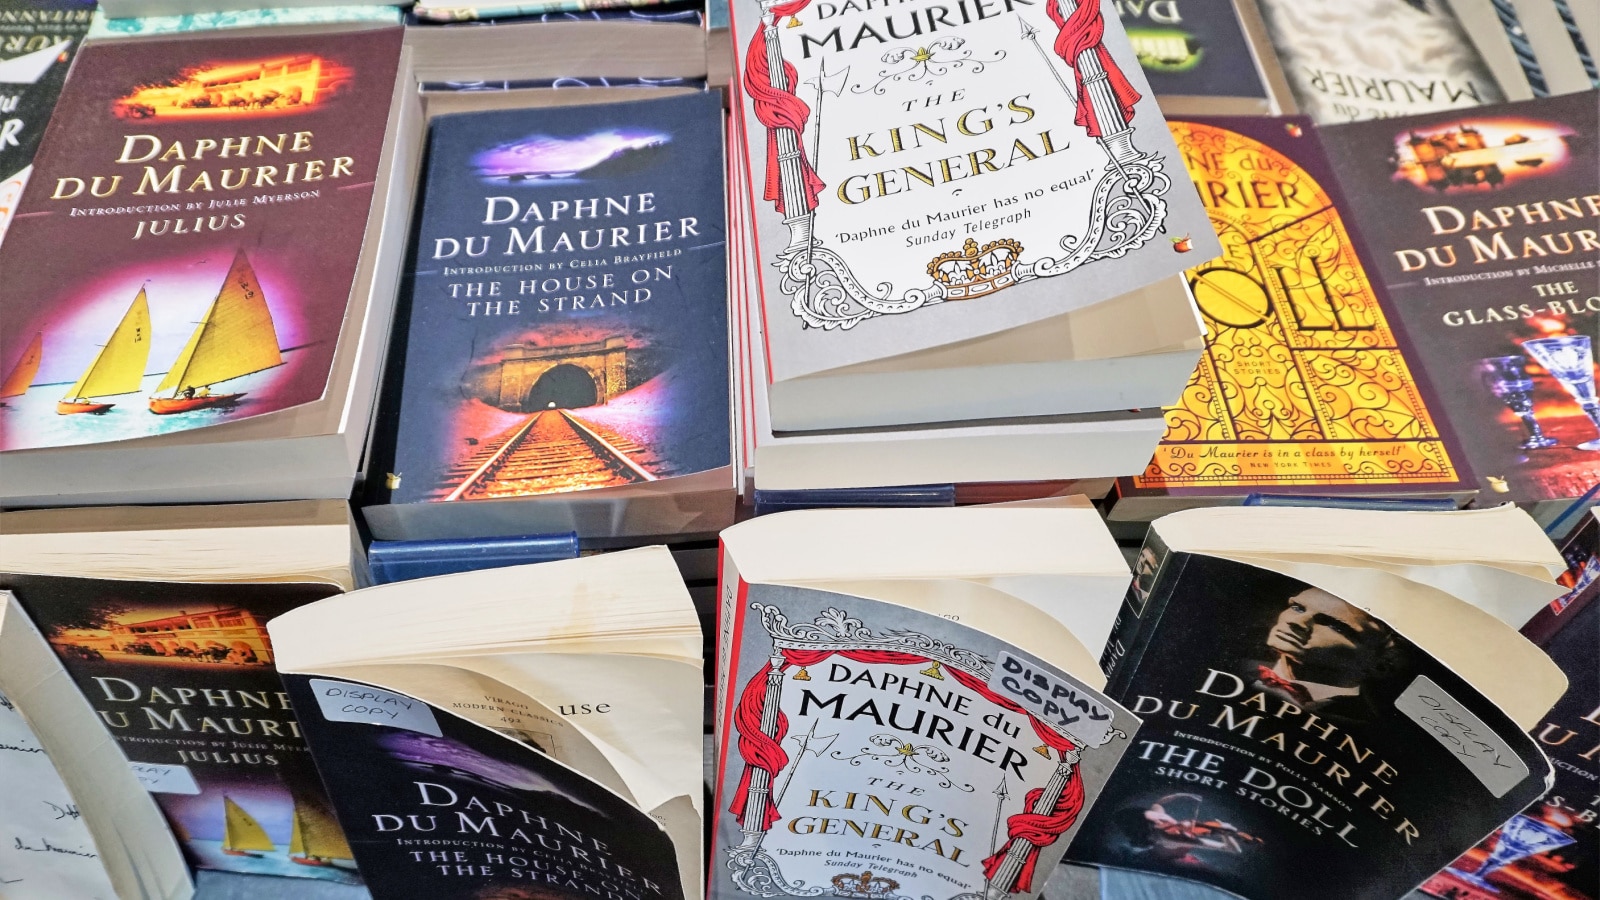 Jamaica Inn, Cornwall, England - Aug 2017: Close up of a pile of Daphne Du Maurier paperback books for sale.